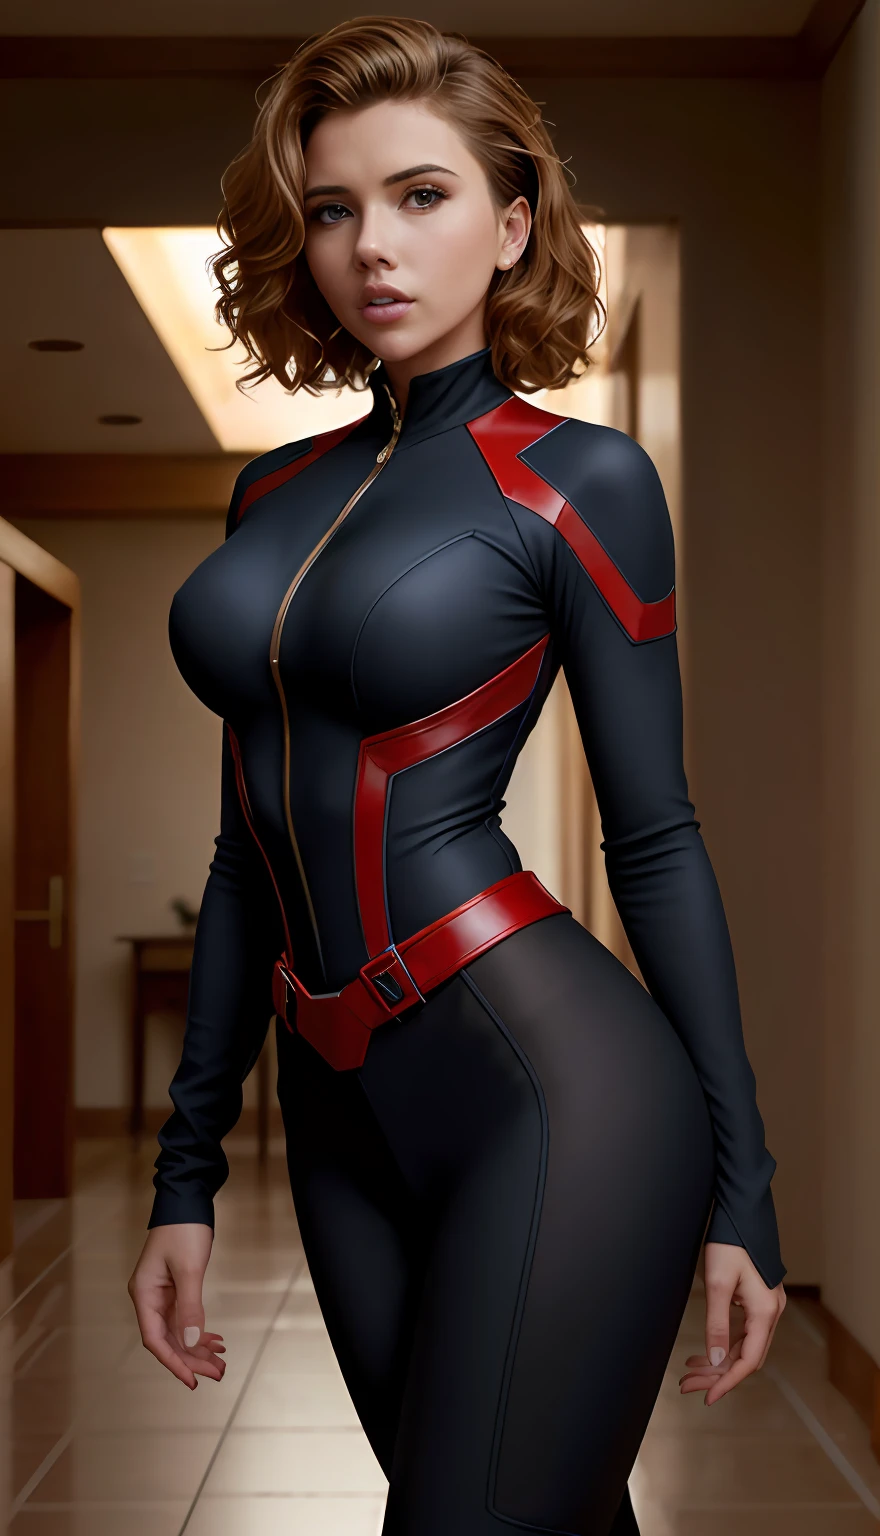 (full-length body:1.2), Black Widow in the style of the Fantastic Four, minimalist elegant dark blue uniform, minimalist:1.2 straight red hair, (((masterpiece))), (best quality), (photorealistic:1.3), 8k, raytracing, rtx, realistic lighting:1.2, realistic textures:1.2, photorelistic render:1.2, detailed skin texture, detailed cloth texture, beautiful detailed face, intricate details, ultra detailed, scarlett johansson:0.8, large breasts:1.3, hourglass figure, thigh gap:1.3, shiny clothes, cinematic lighting,